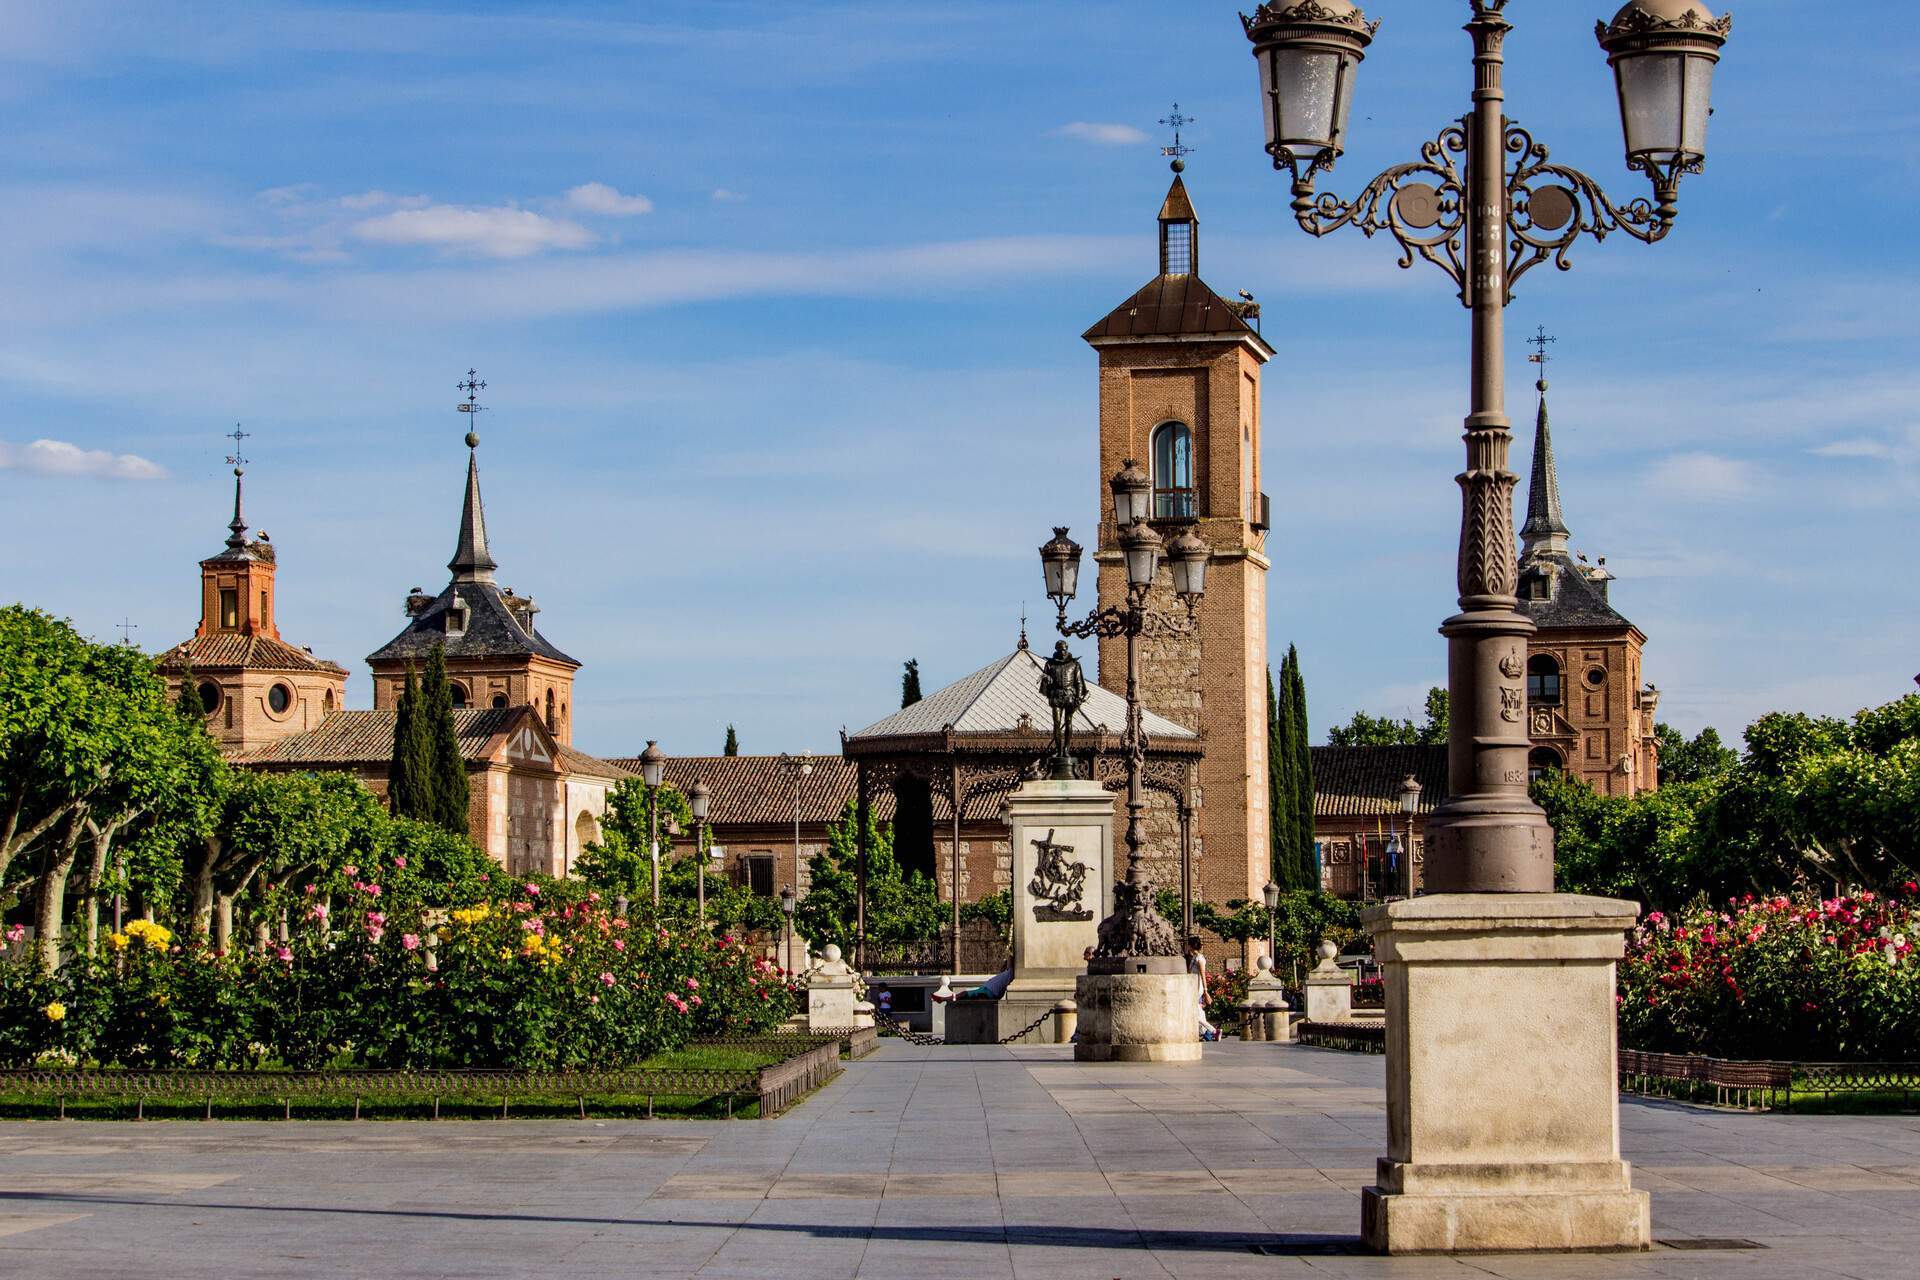 A plaza with a gazebo, lamp posts, and a landscape of colourful flowers and trees with a view of towers with spires.